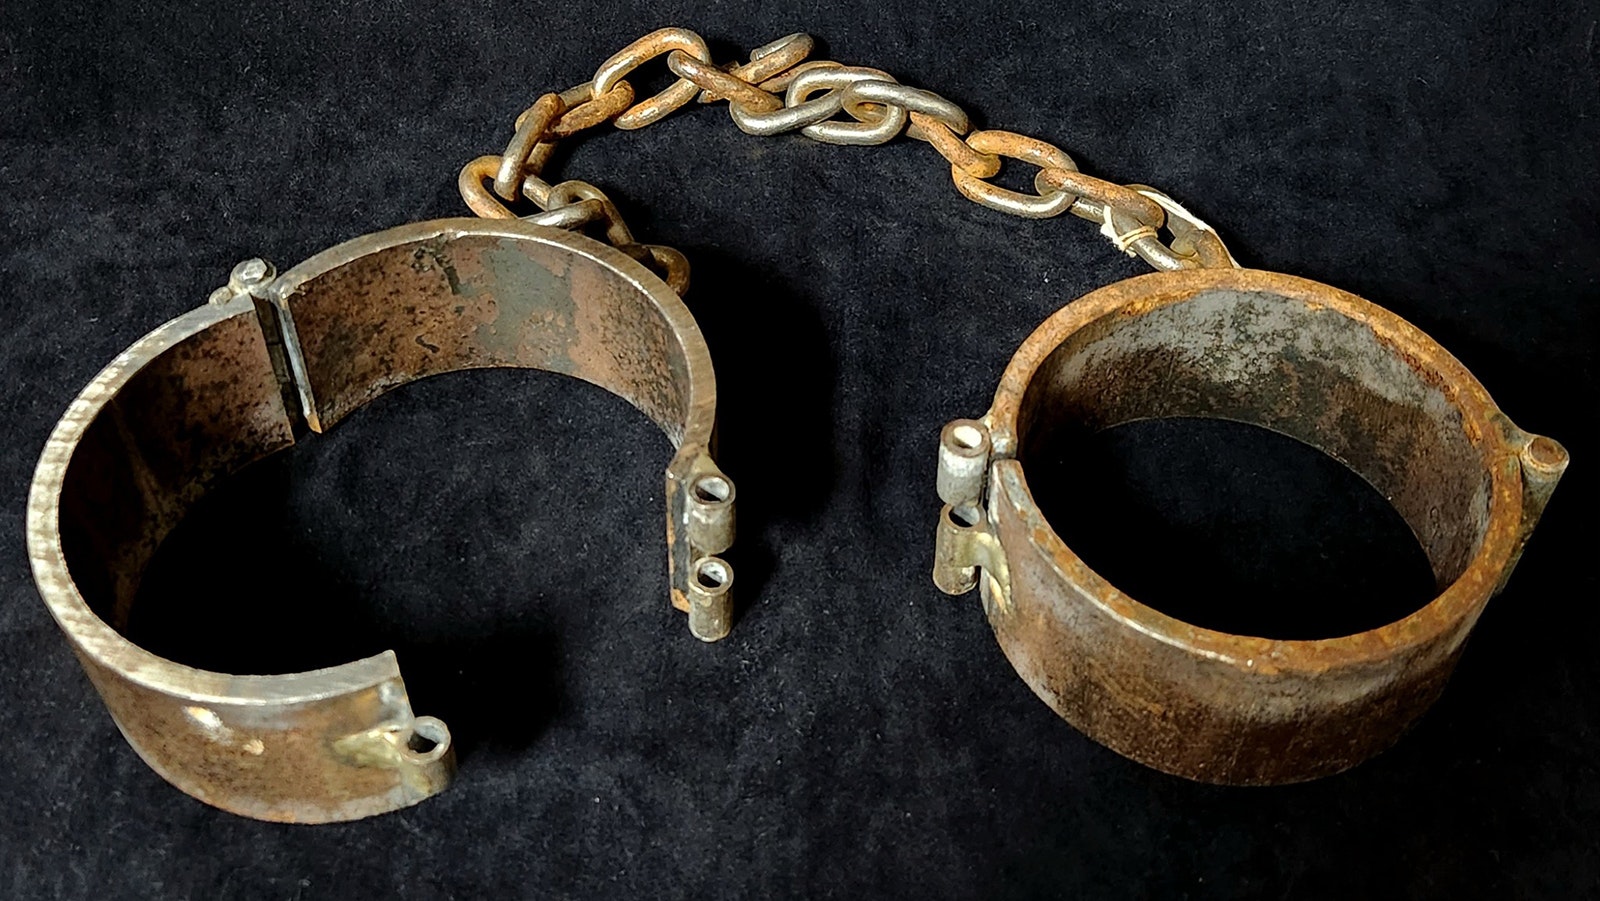 The shackles of Dave Carter, aka "Slap Jack Dave," who died while escaping from the Carbon County Jail in the 1870s.